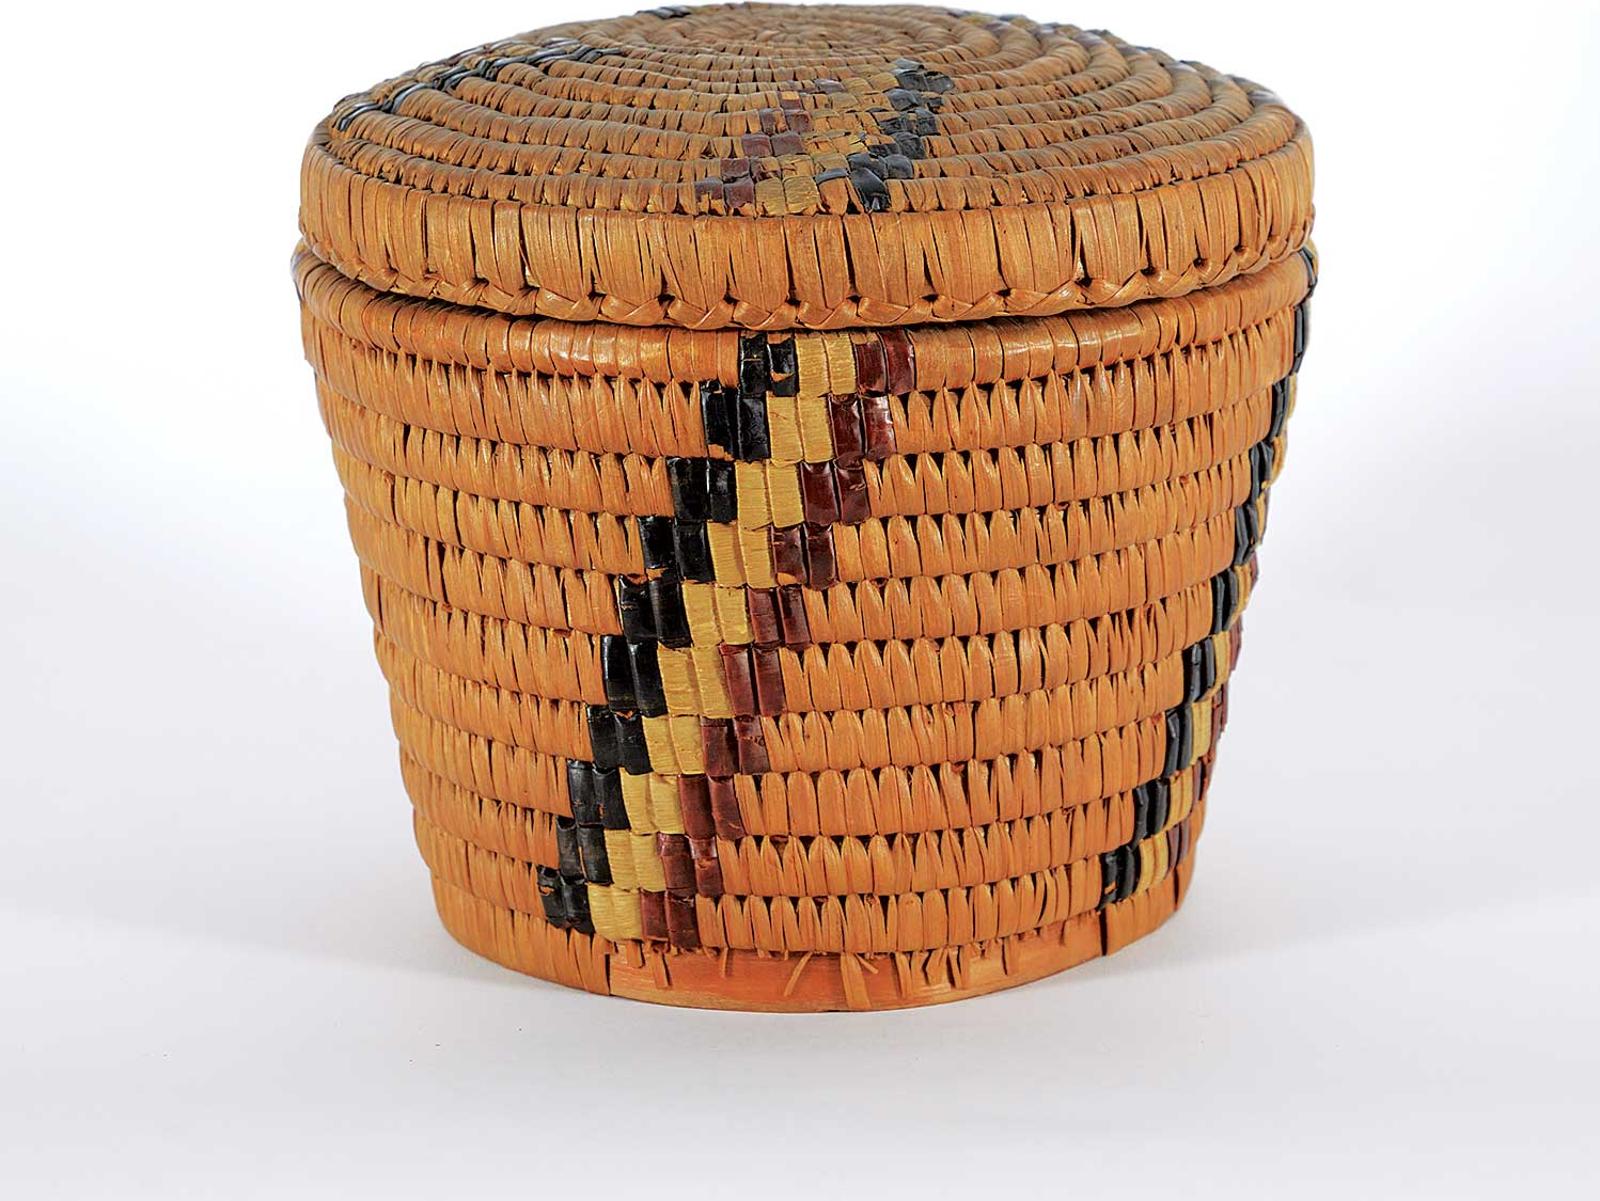 Northwest Coast First Nations School - Round Lidded Basket with Brown, White and Black Stripes